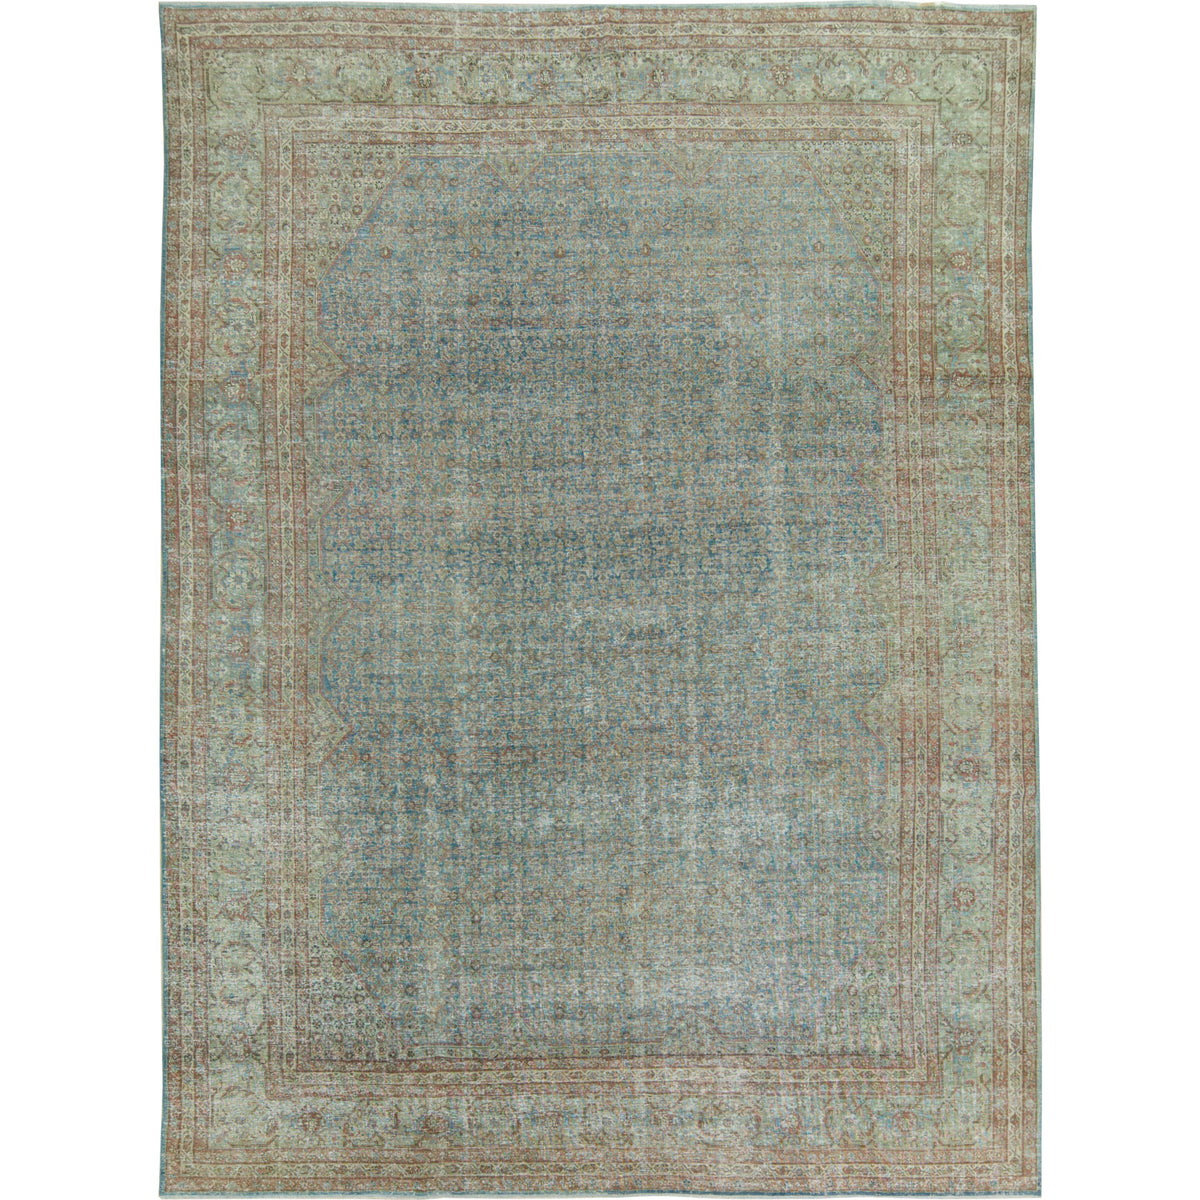 Princess - Vintage Turkish Rug, Enchanting Your Floors with Timeless Beauty | Kuden Rugs